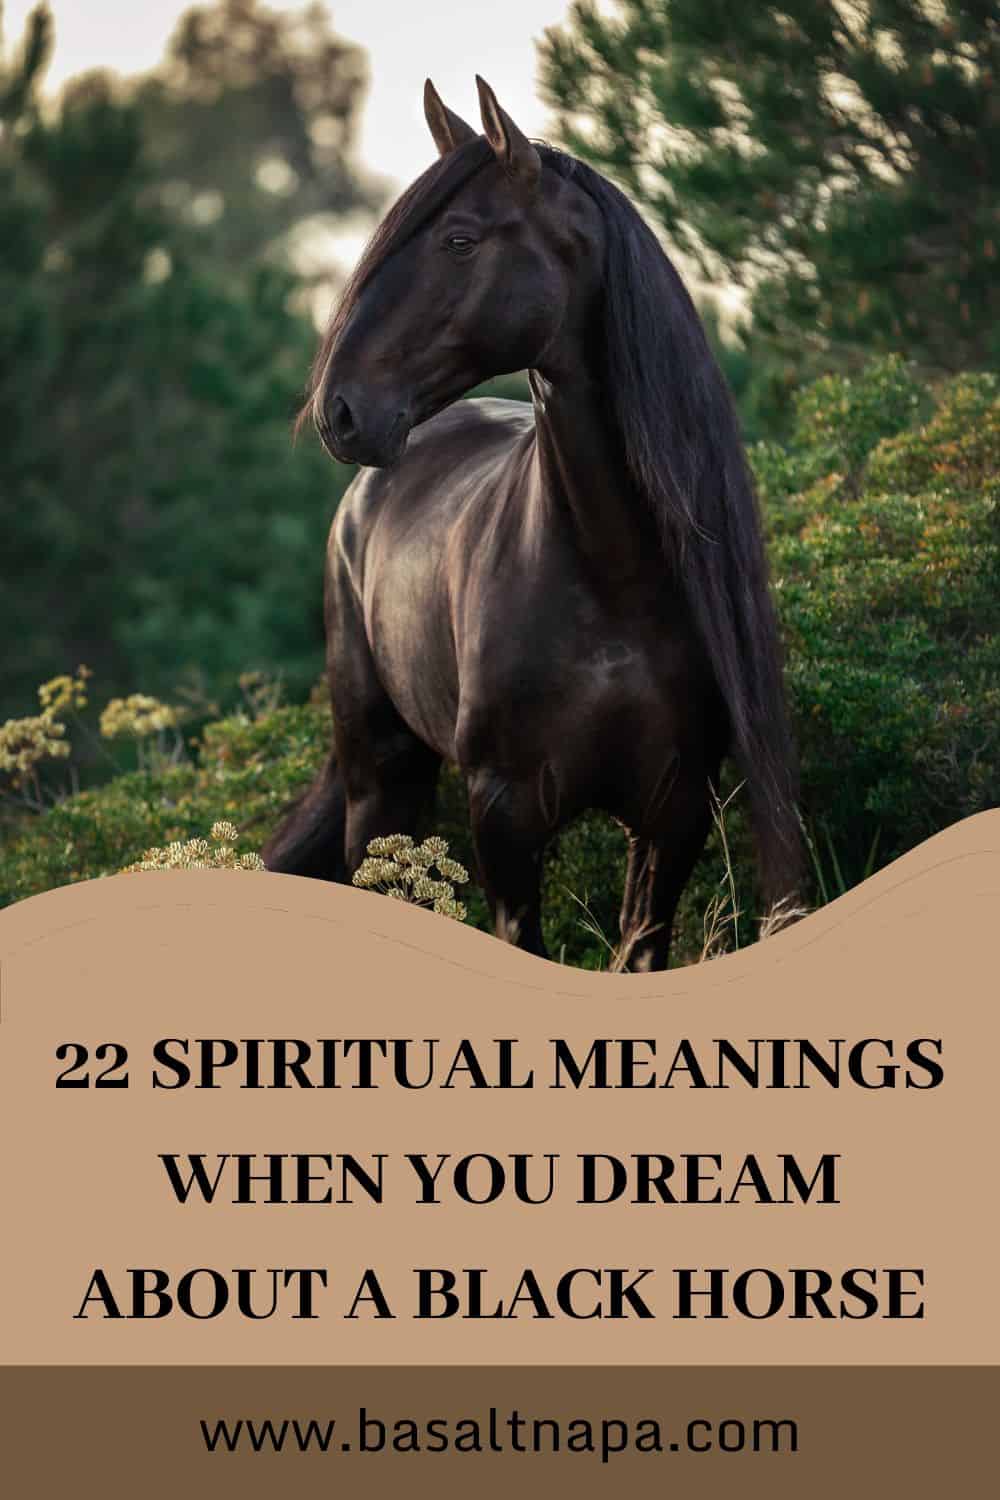 What does it mean when you dream about a black horse?